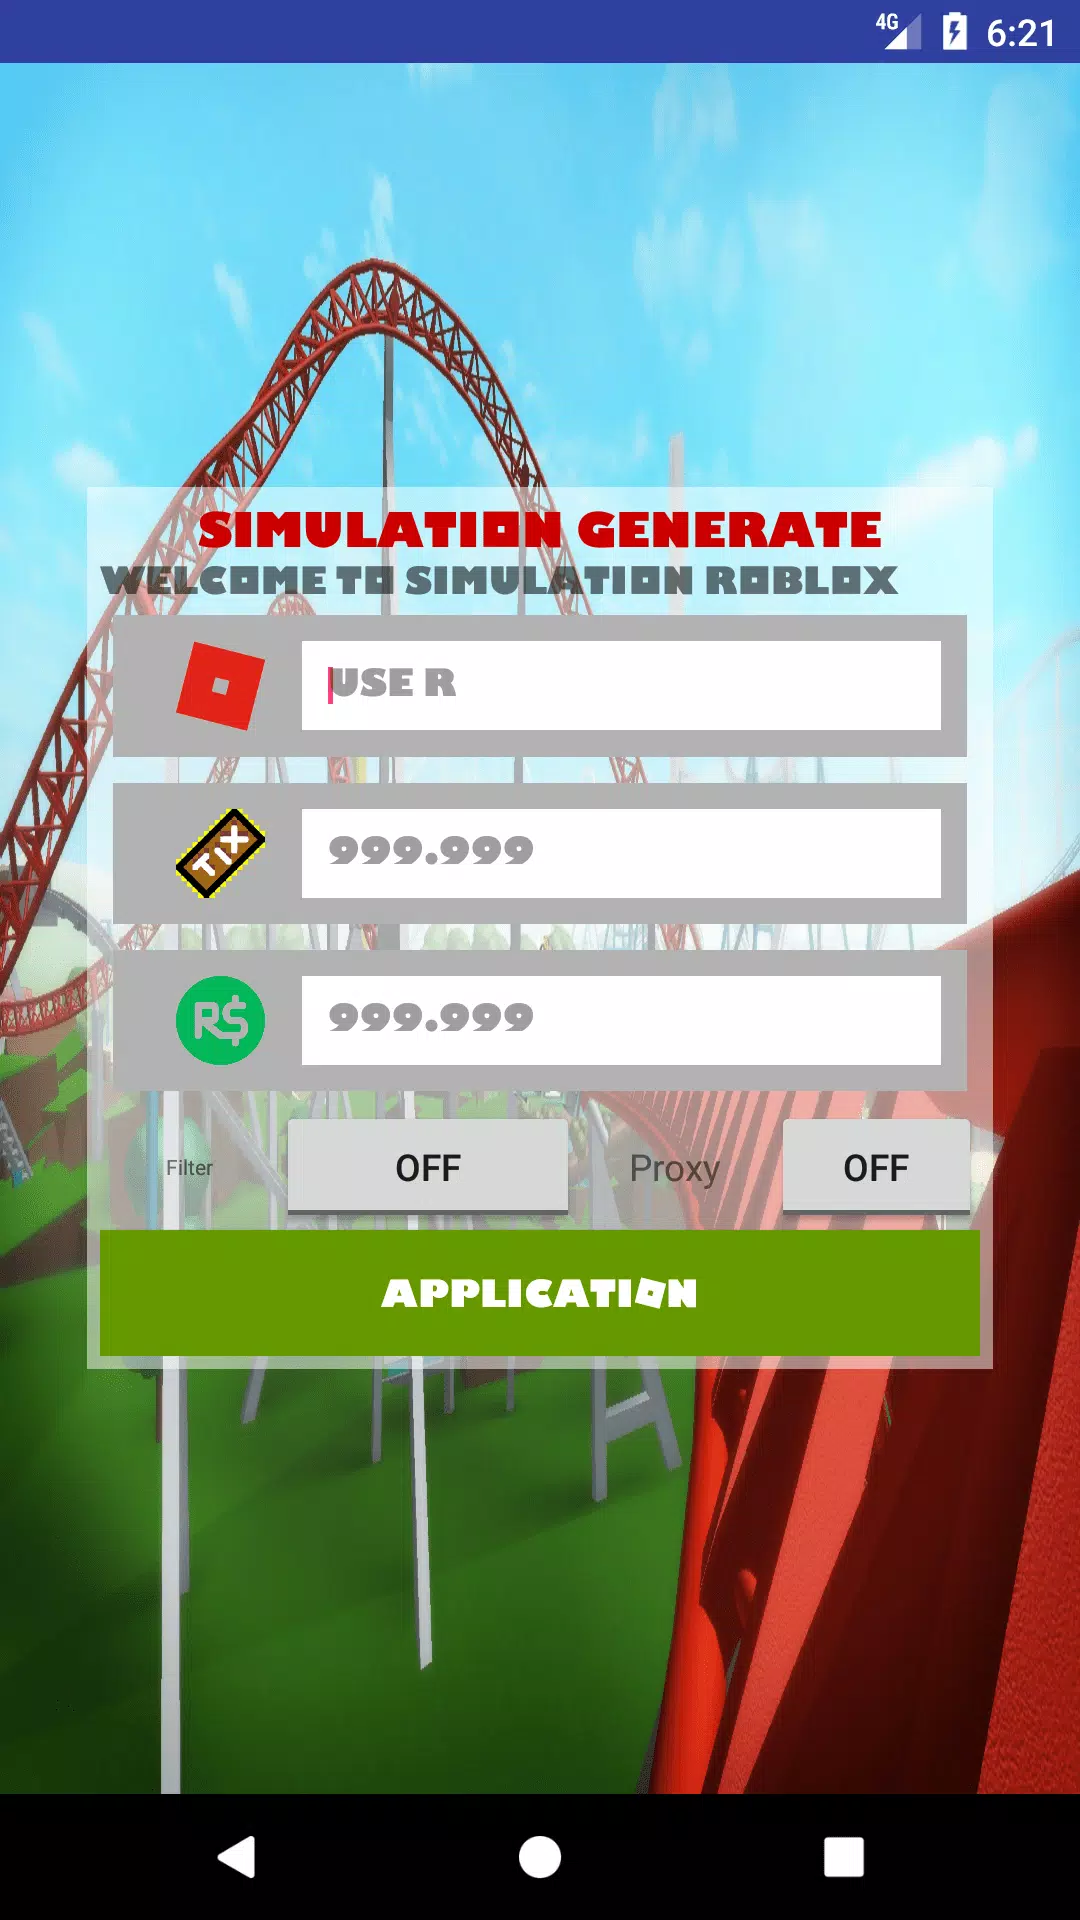 Get Free Robux For Roblox Simulator APK pour Android Télécharger